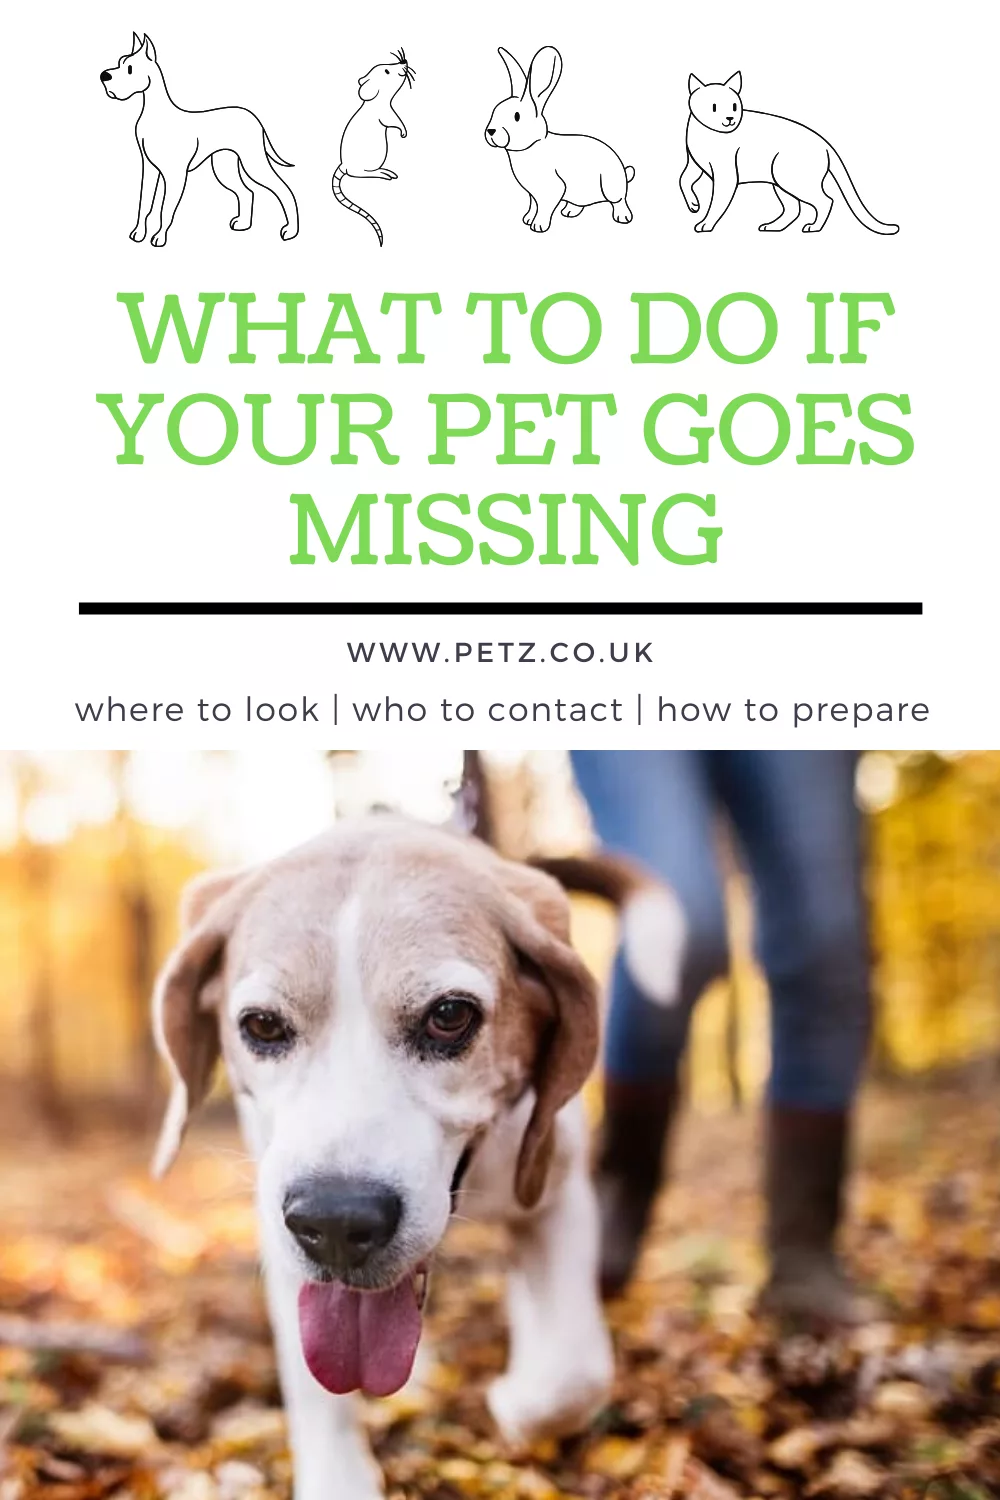 What to do if your pet goes missing